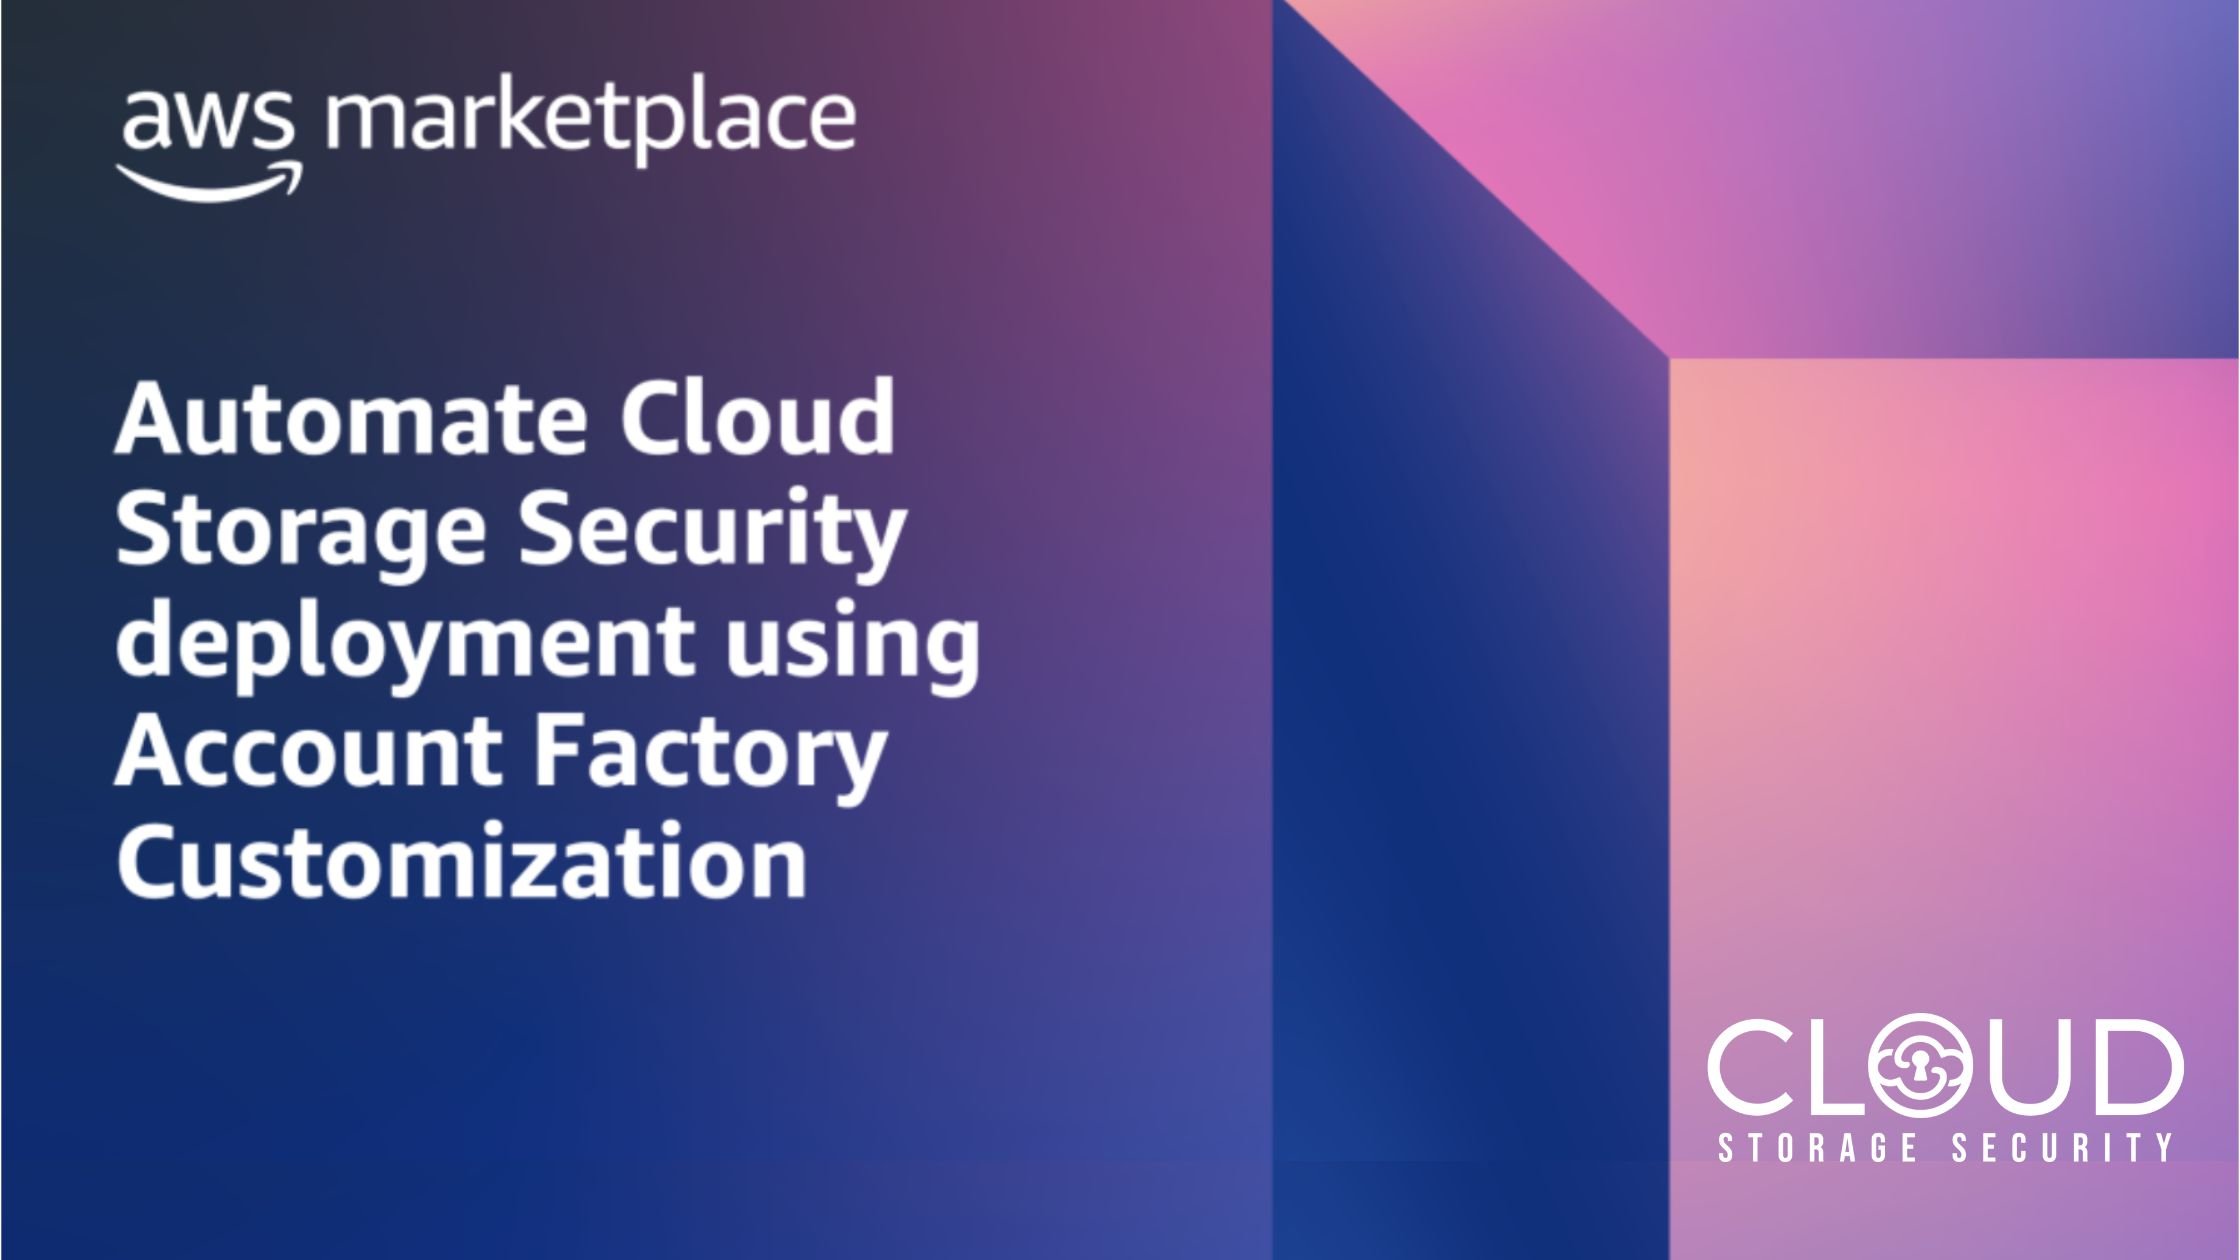 Automate Cloud Storage Security deployment using Account Factory Customization